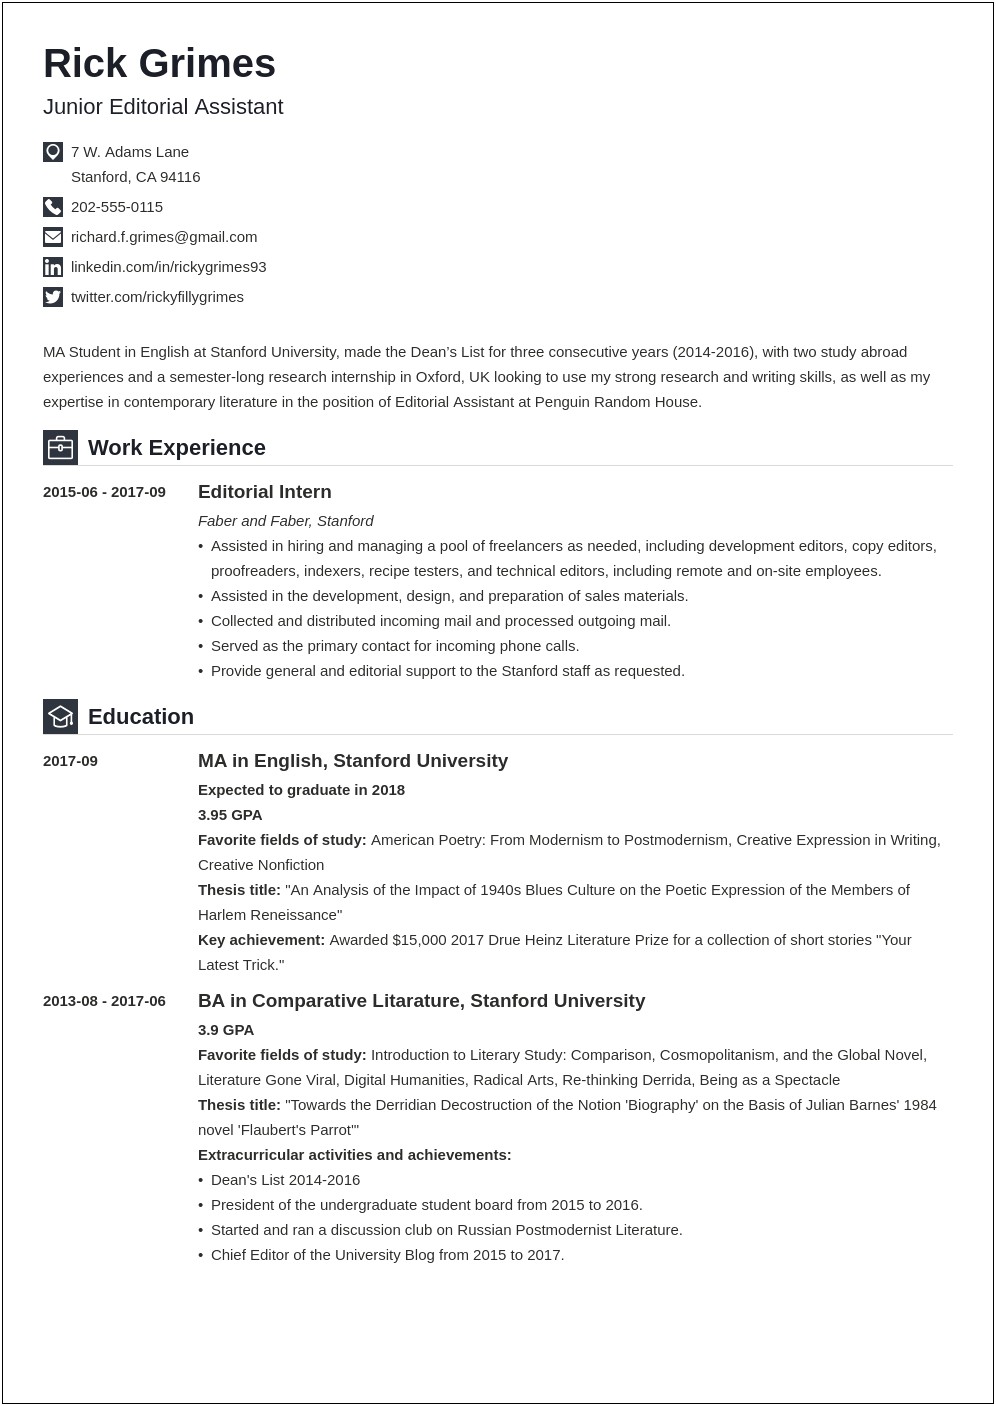 Examples Of Entry Level Job Resumes